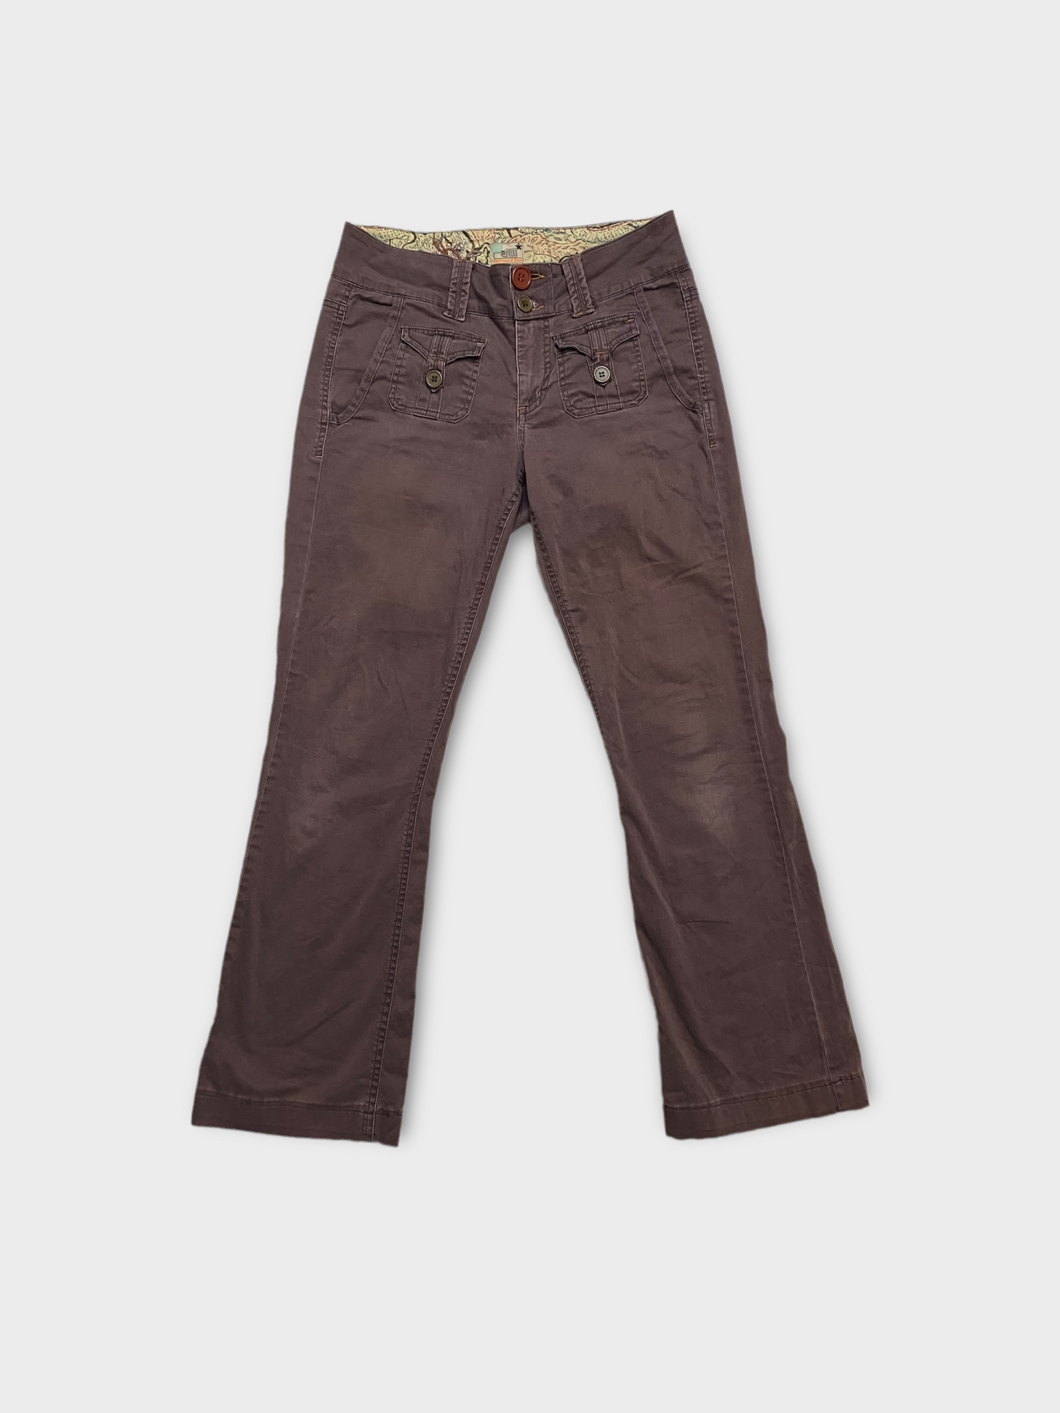 Low Rise Chocolate Brown Early 00's Cargo Pants